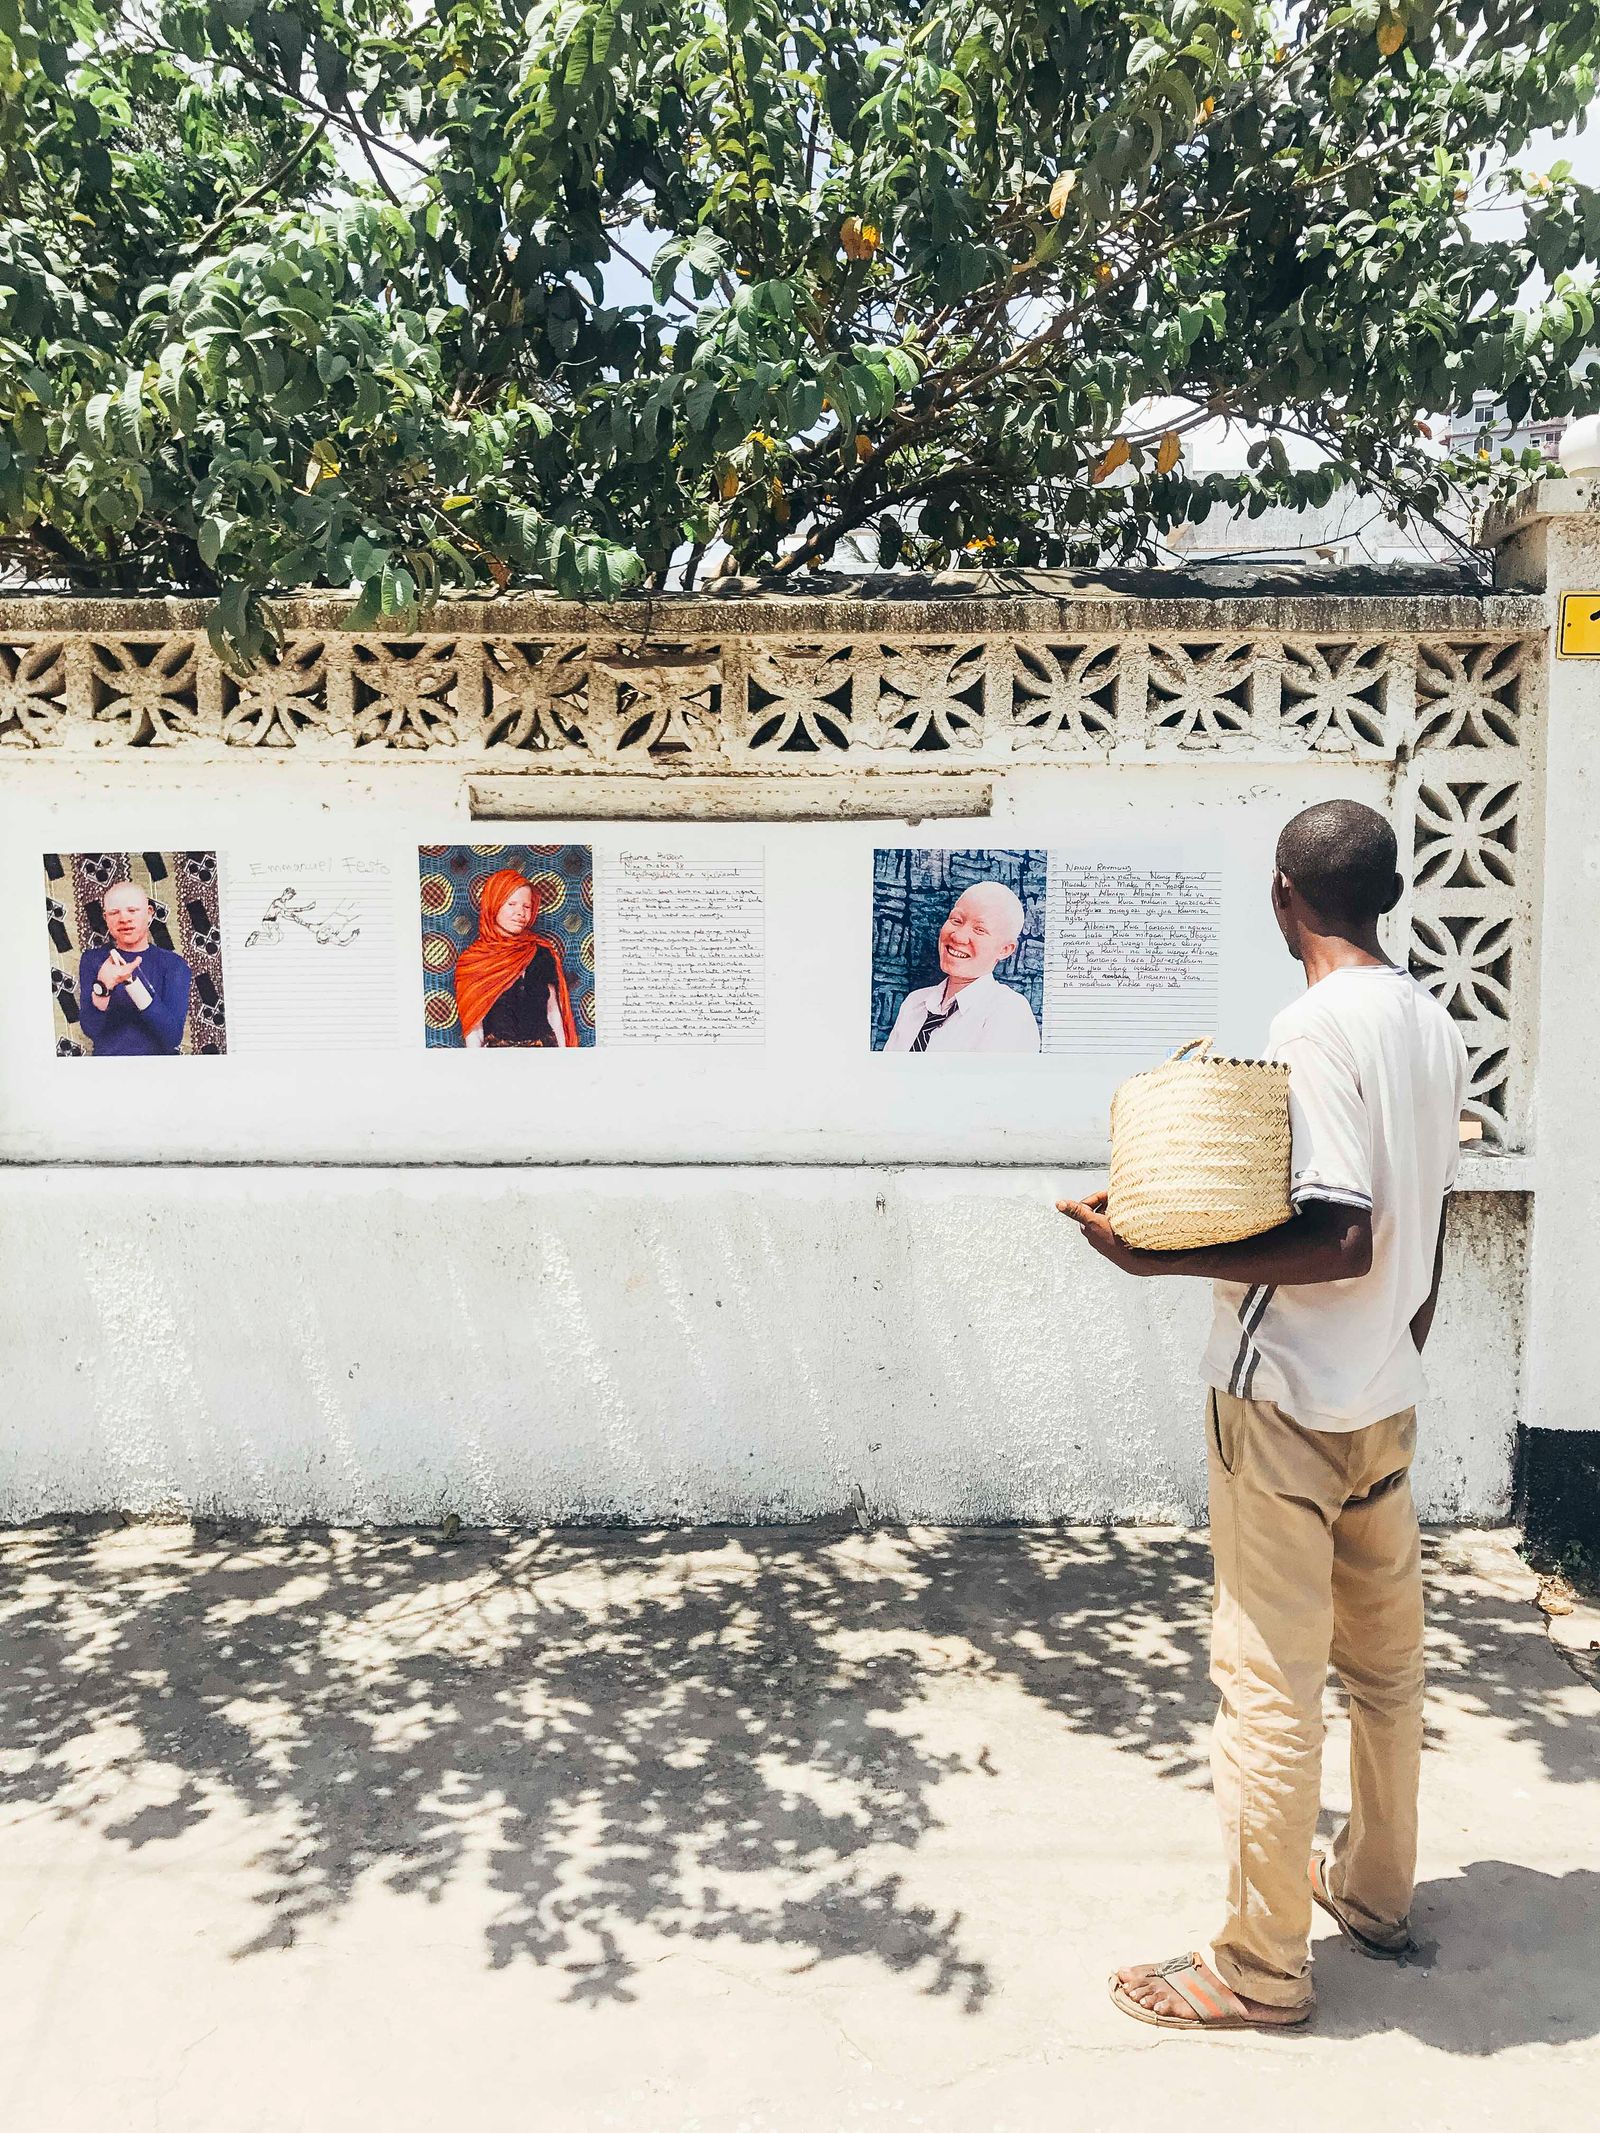 © Soraya Matos - *A Passer-by stops and approaches to read posters, and others gathered – Mikocheni, Tanzania.